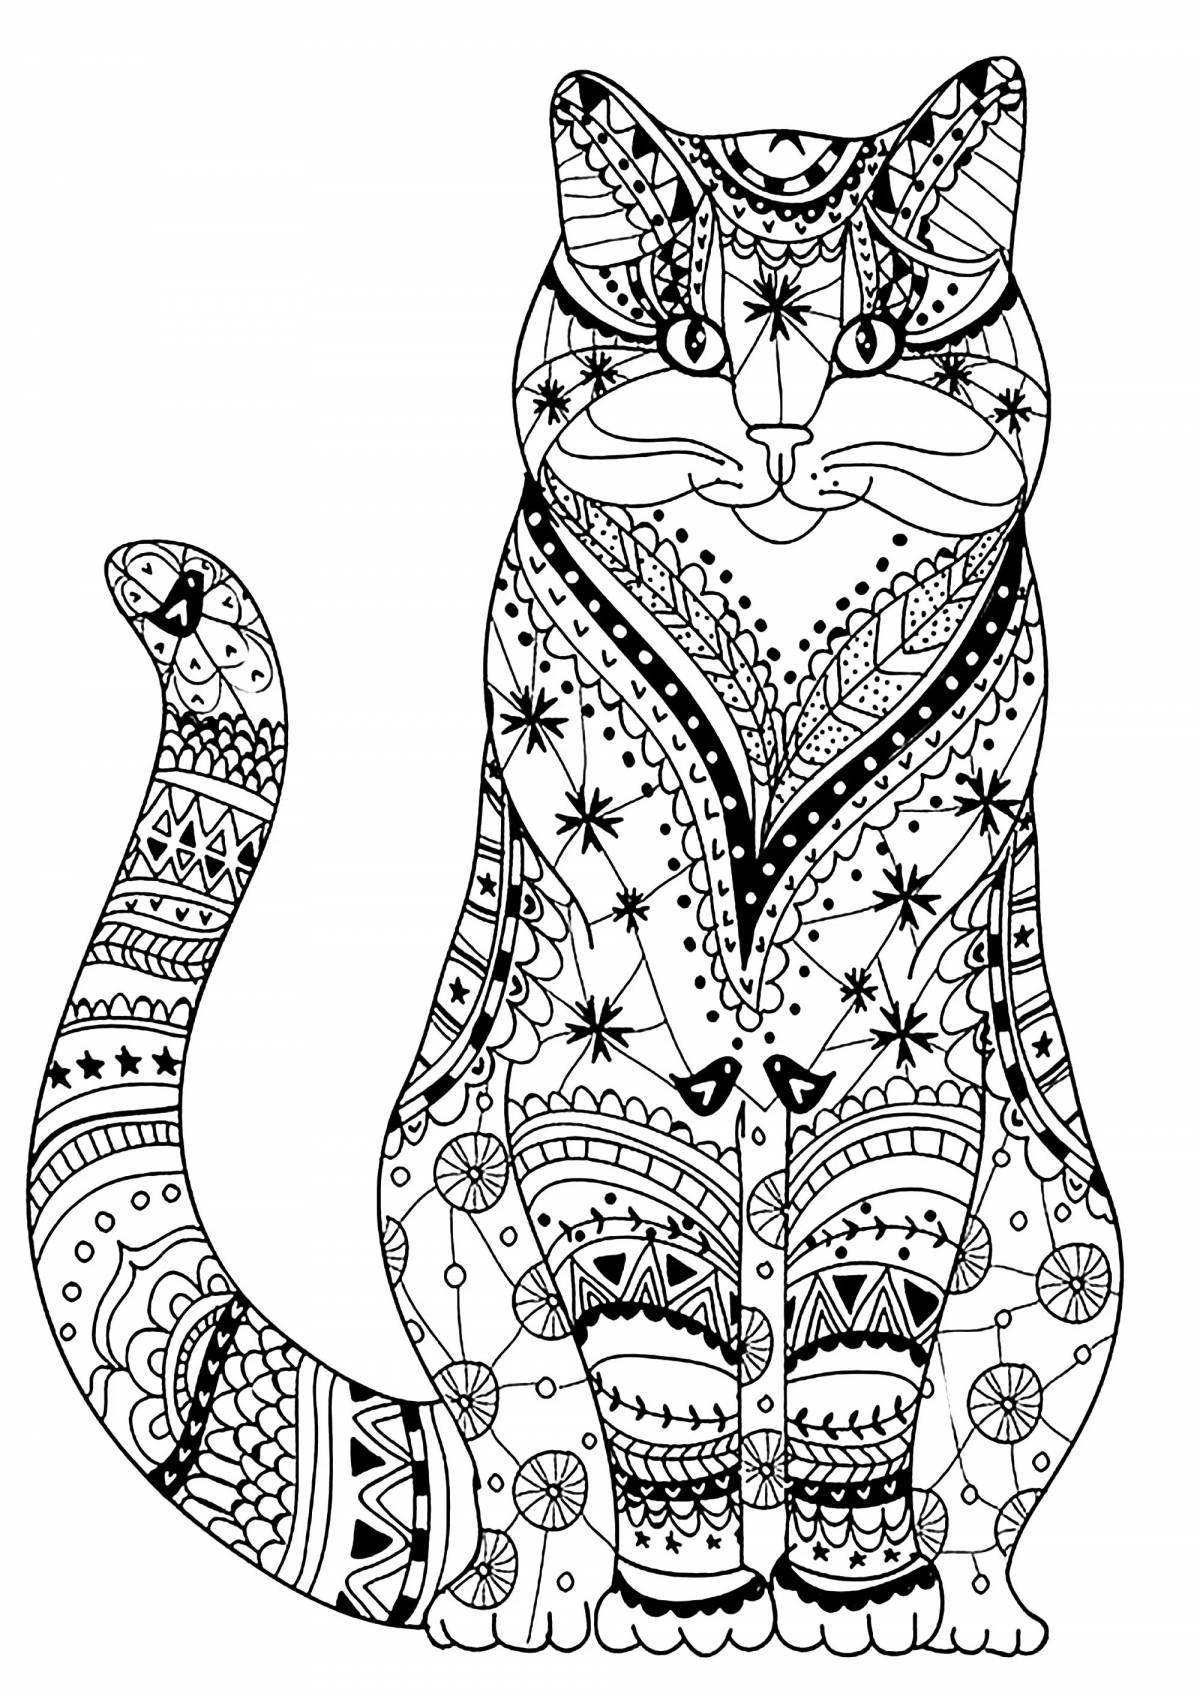 Harmonious anti-stress coloring book for adults